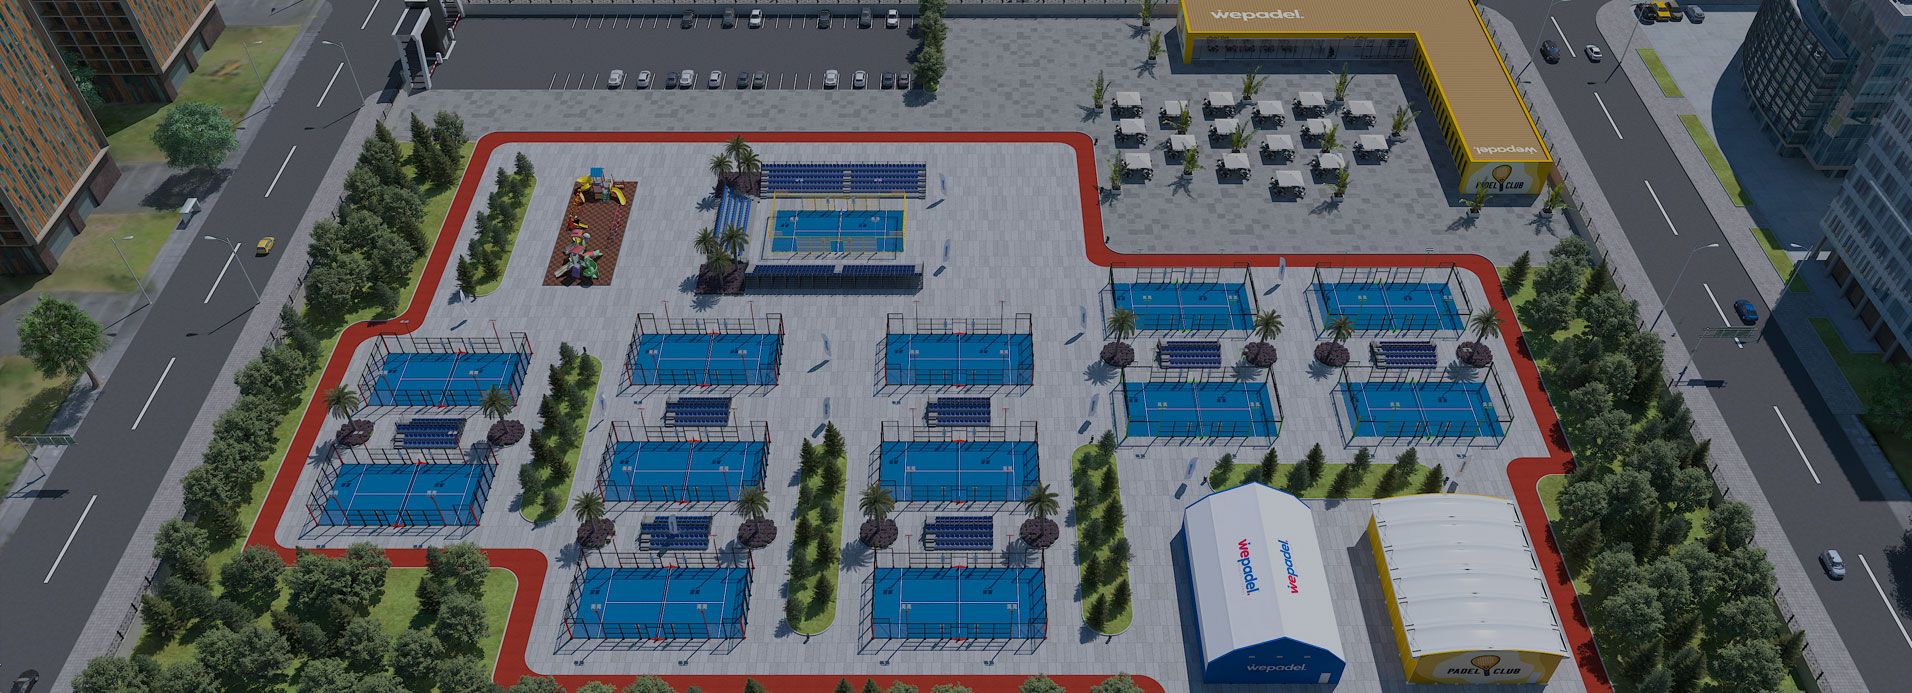 padel-club-overview